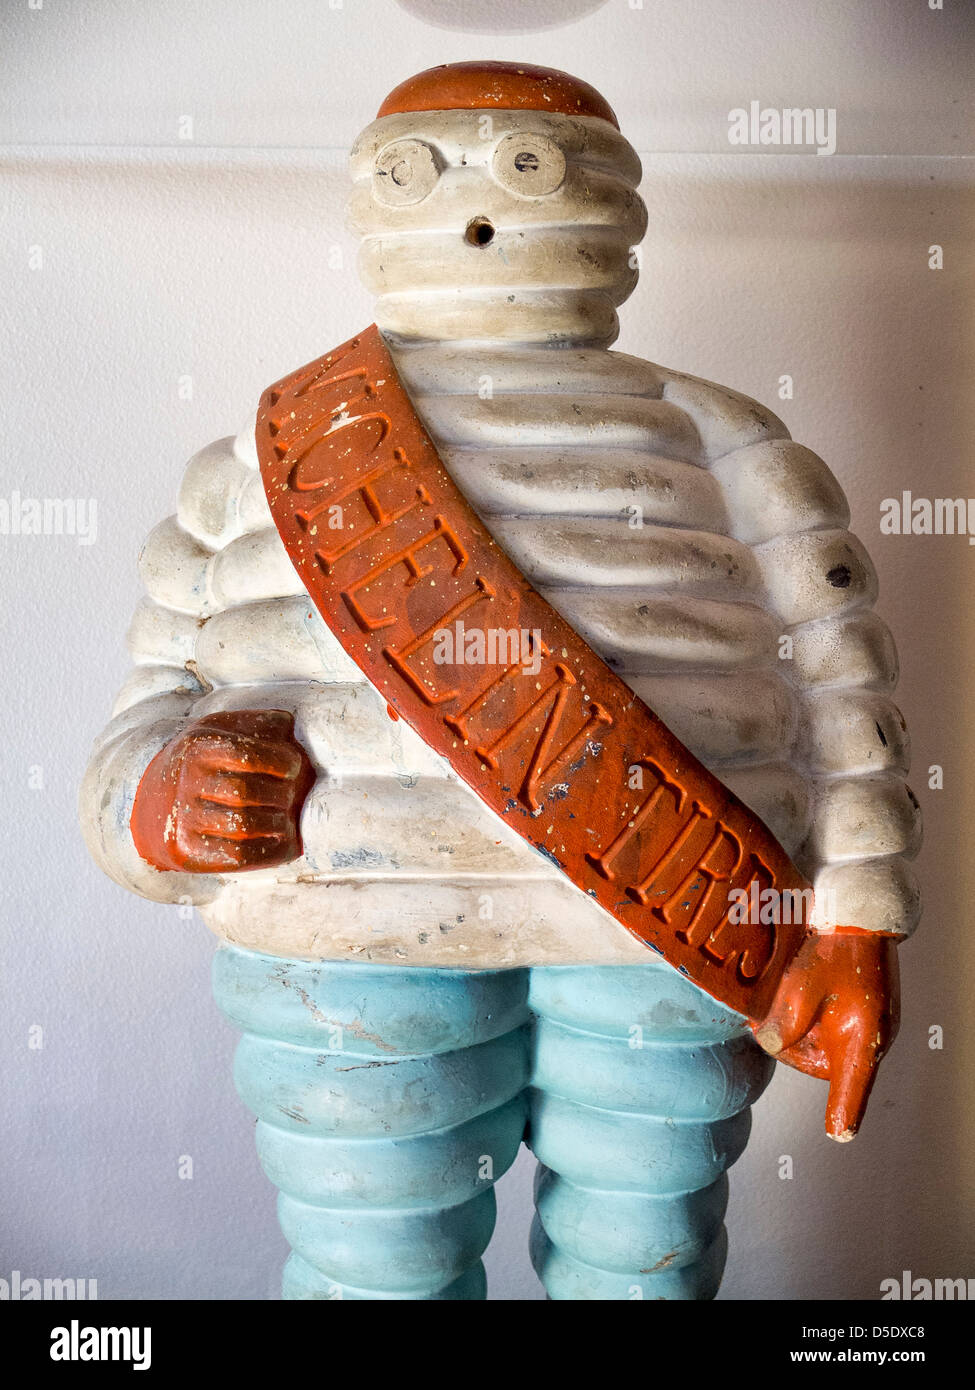 Bibendum, commonly referred to as the Michelin Man, is the symbol of the Michelin tire company. Stock Photo